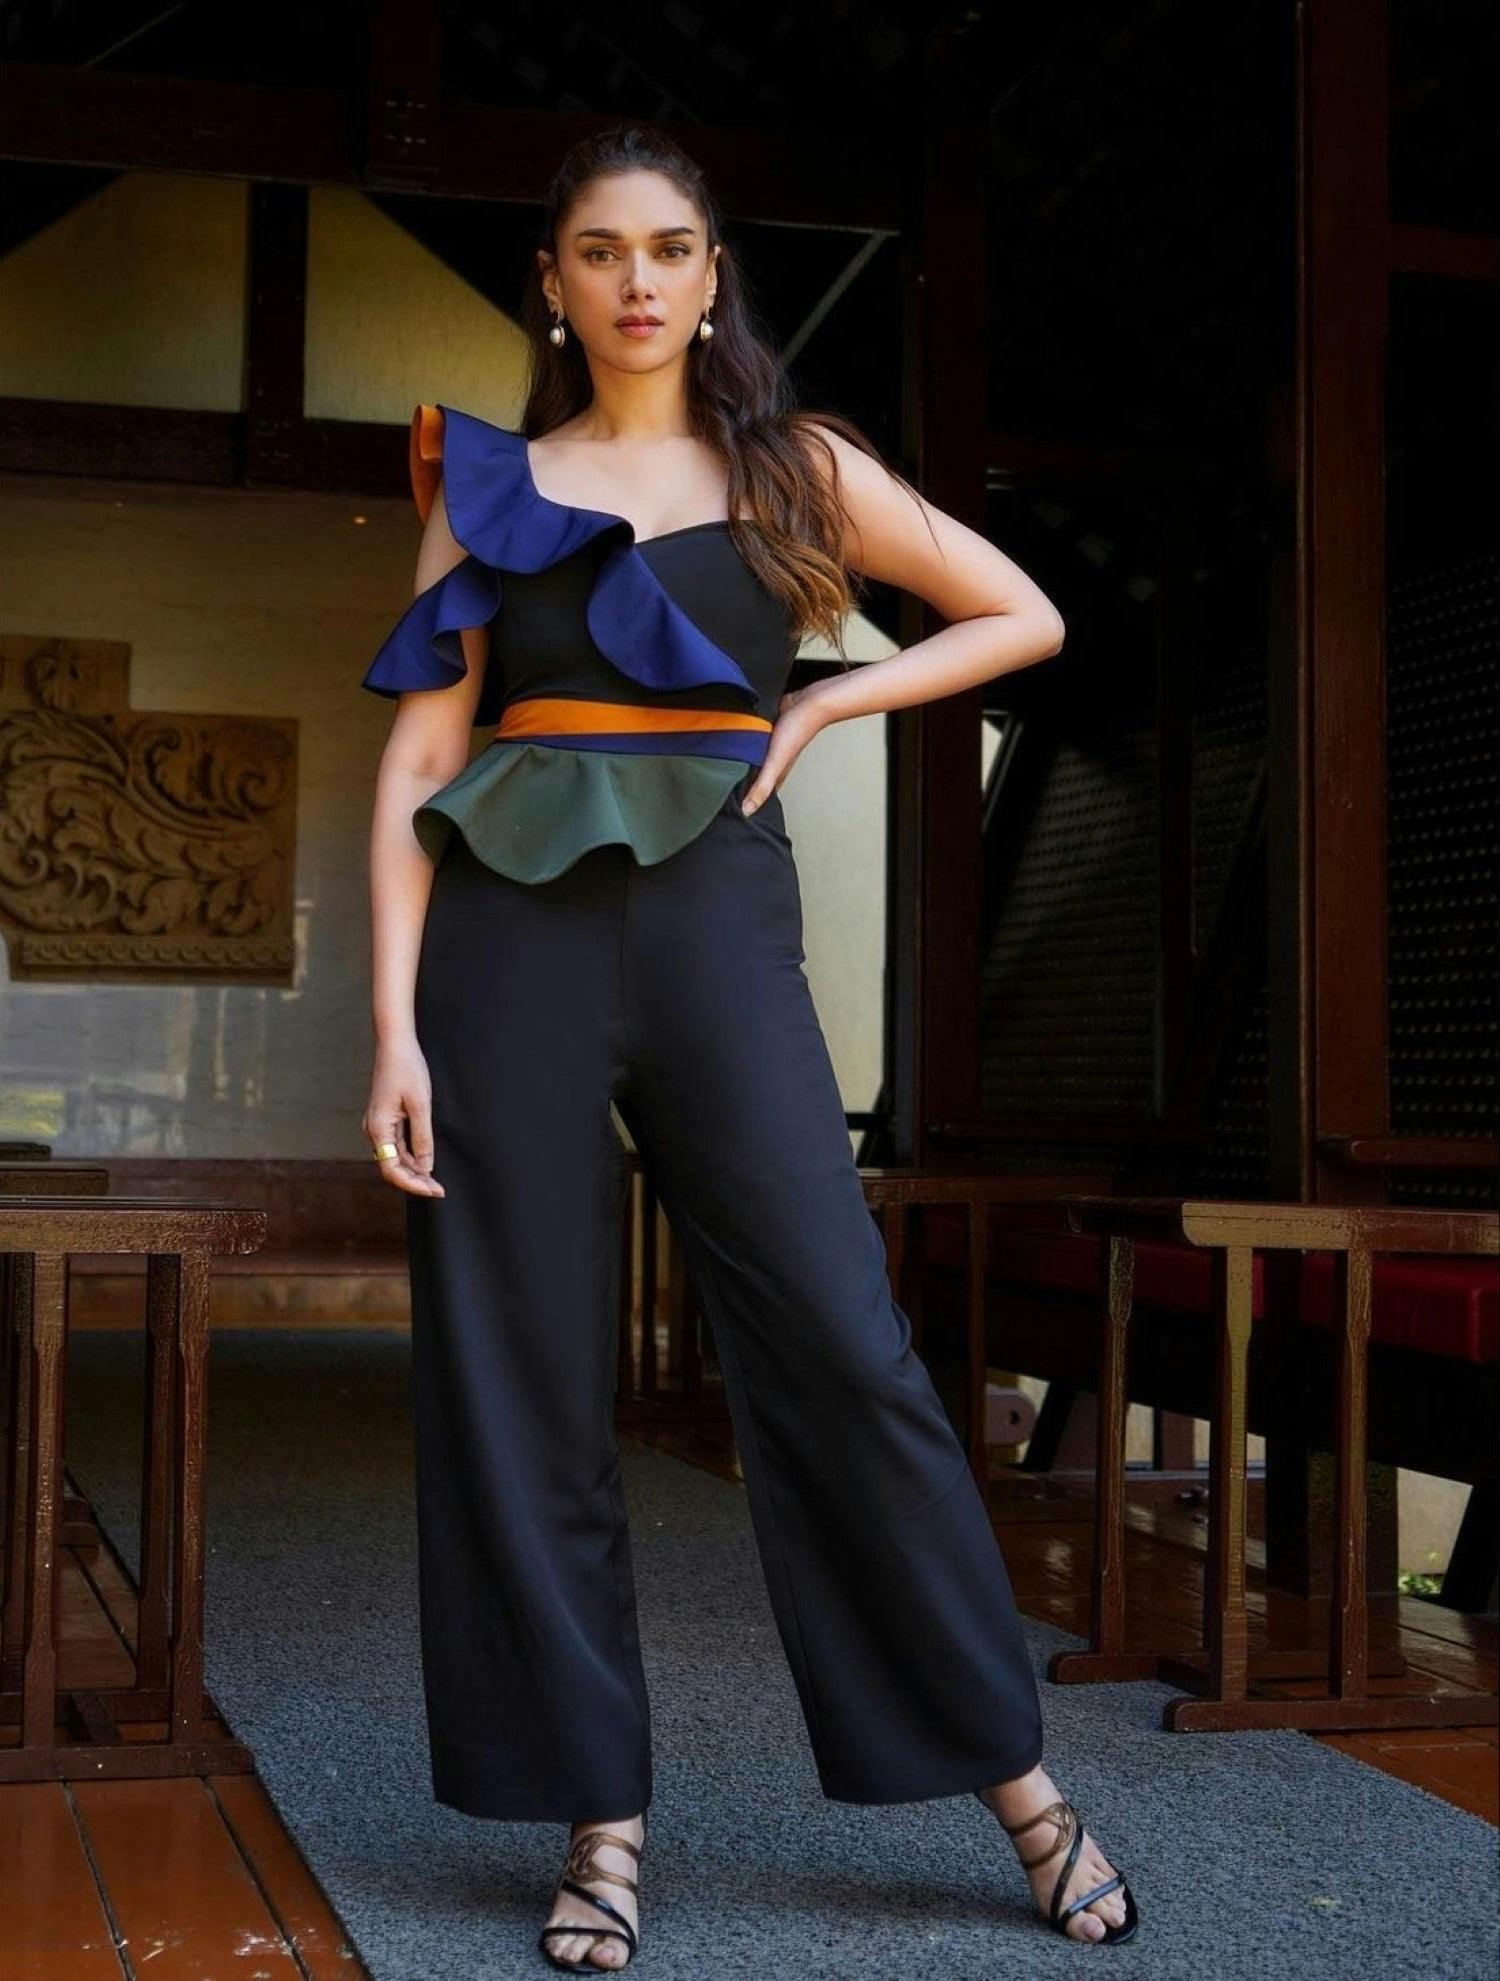 Stella Jumpsuit, a product by Sunandini